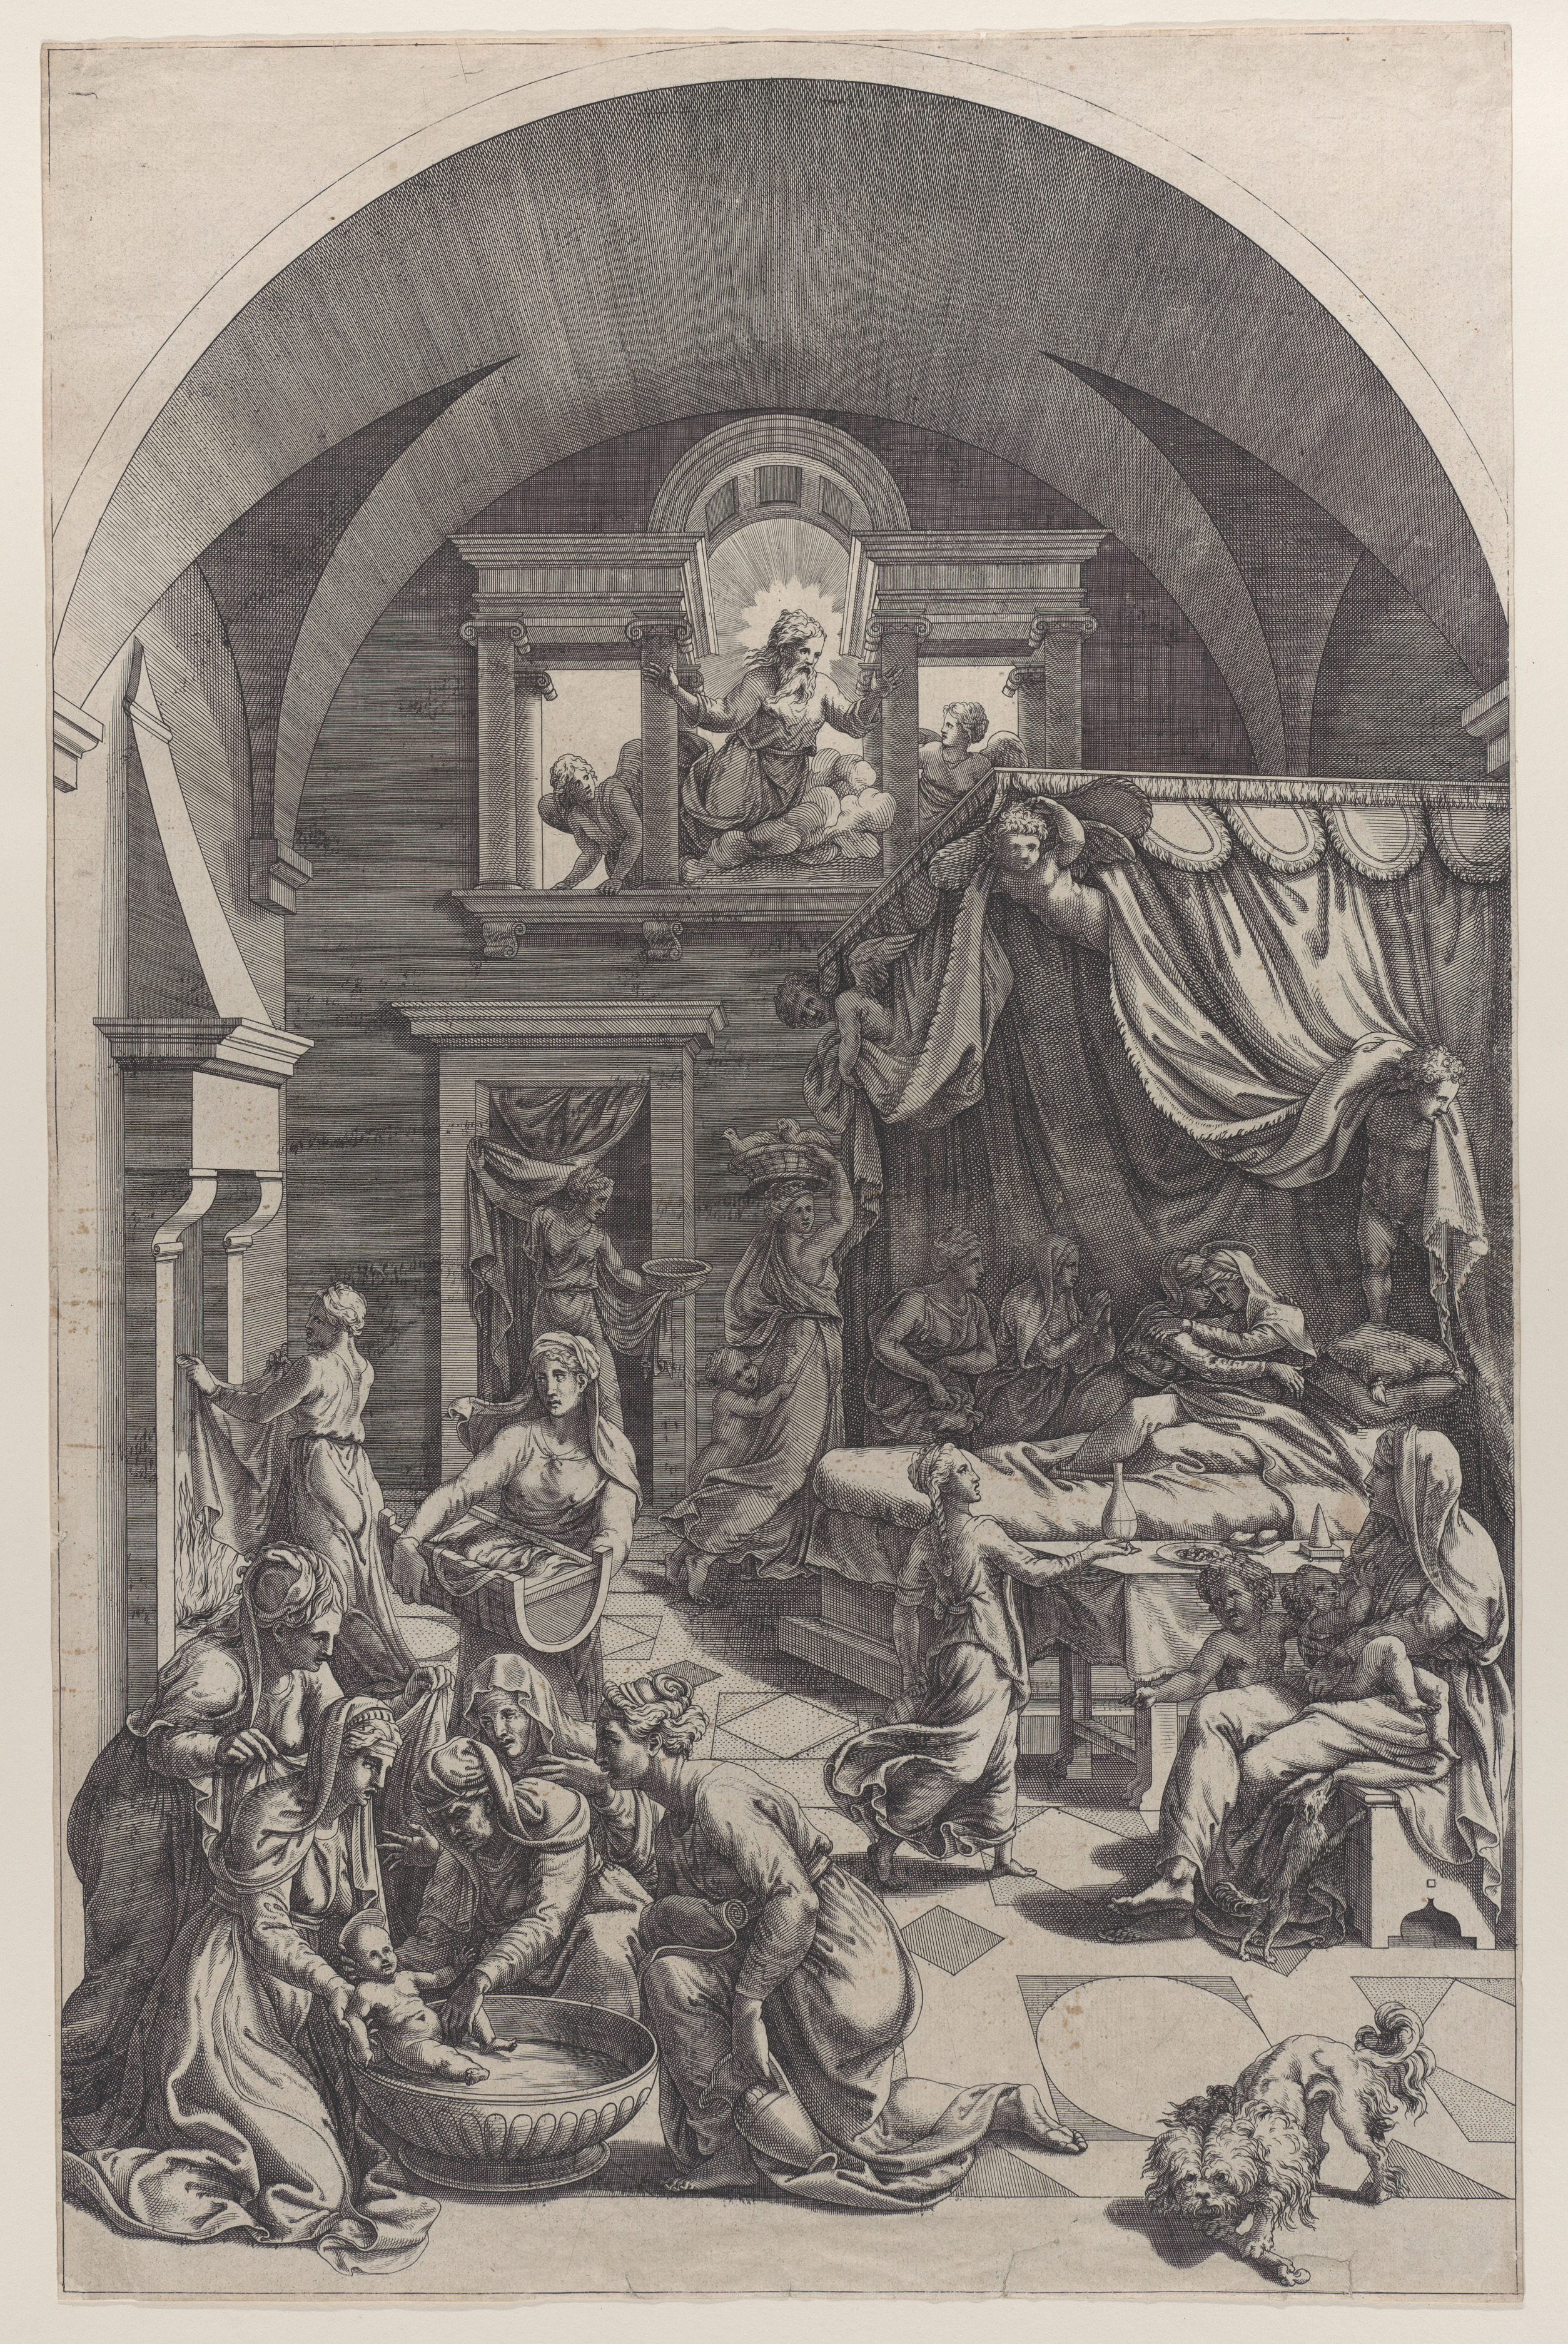 A printed image of a room, filled with people who are attending to various tasks. The primary figure group is at the bottom left of the image, where a group of five woman are bathing the infant Saint John the Baptist in a large vessel. The infant is nude and there is a halo at his head. The room is grand, with classical architecture, and a large window near the ceiling at center where God and two angels look down at the scene.